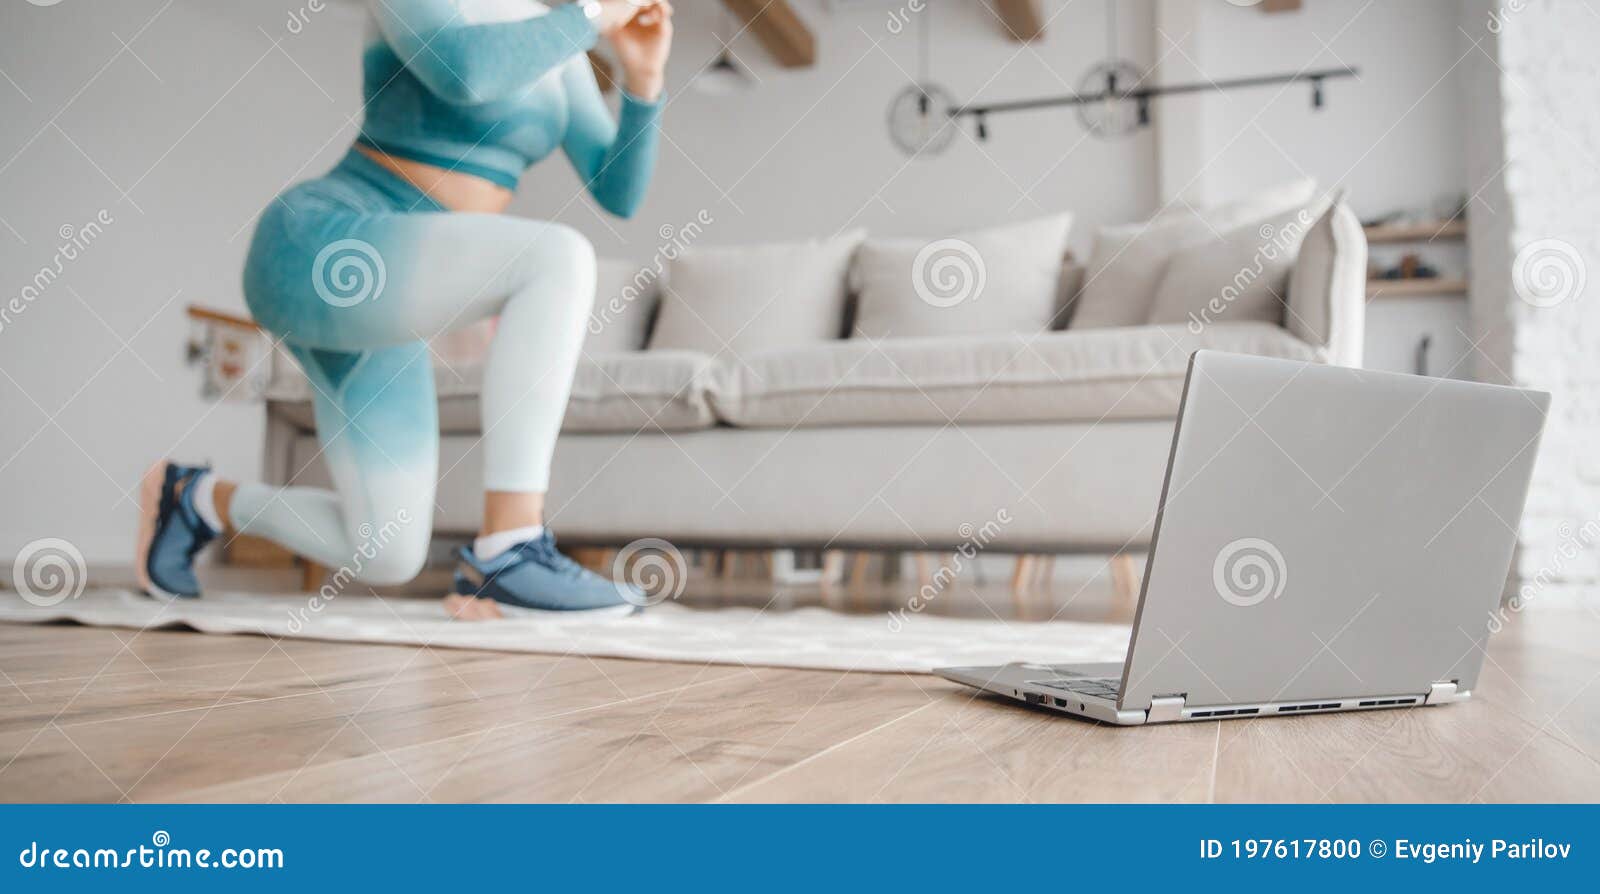 Online Sport Home Via Web Laptop Internet. Woman Performs Fitness Exercises Living Room Stock Photo Image of girl, social: 197617800